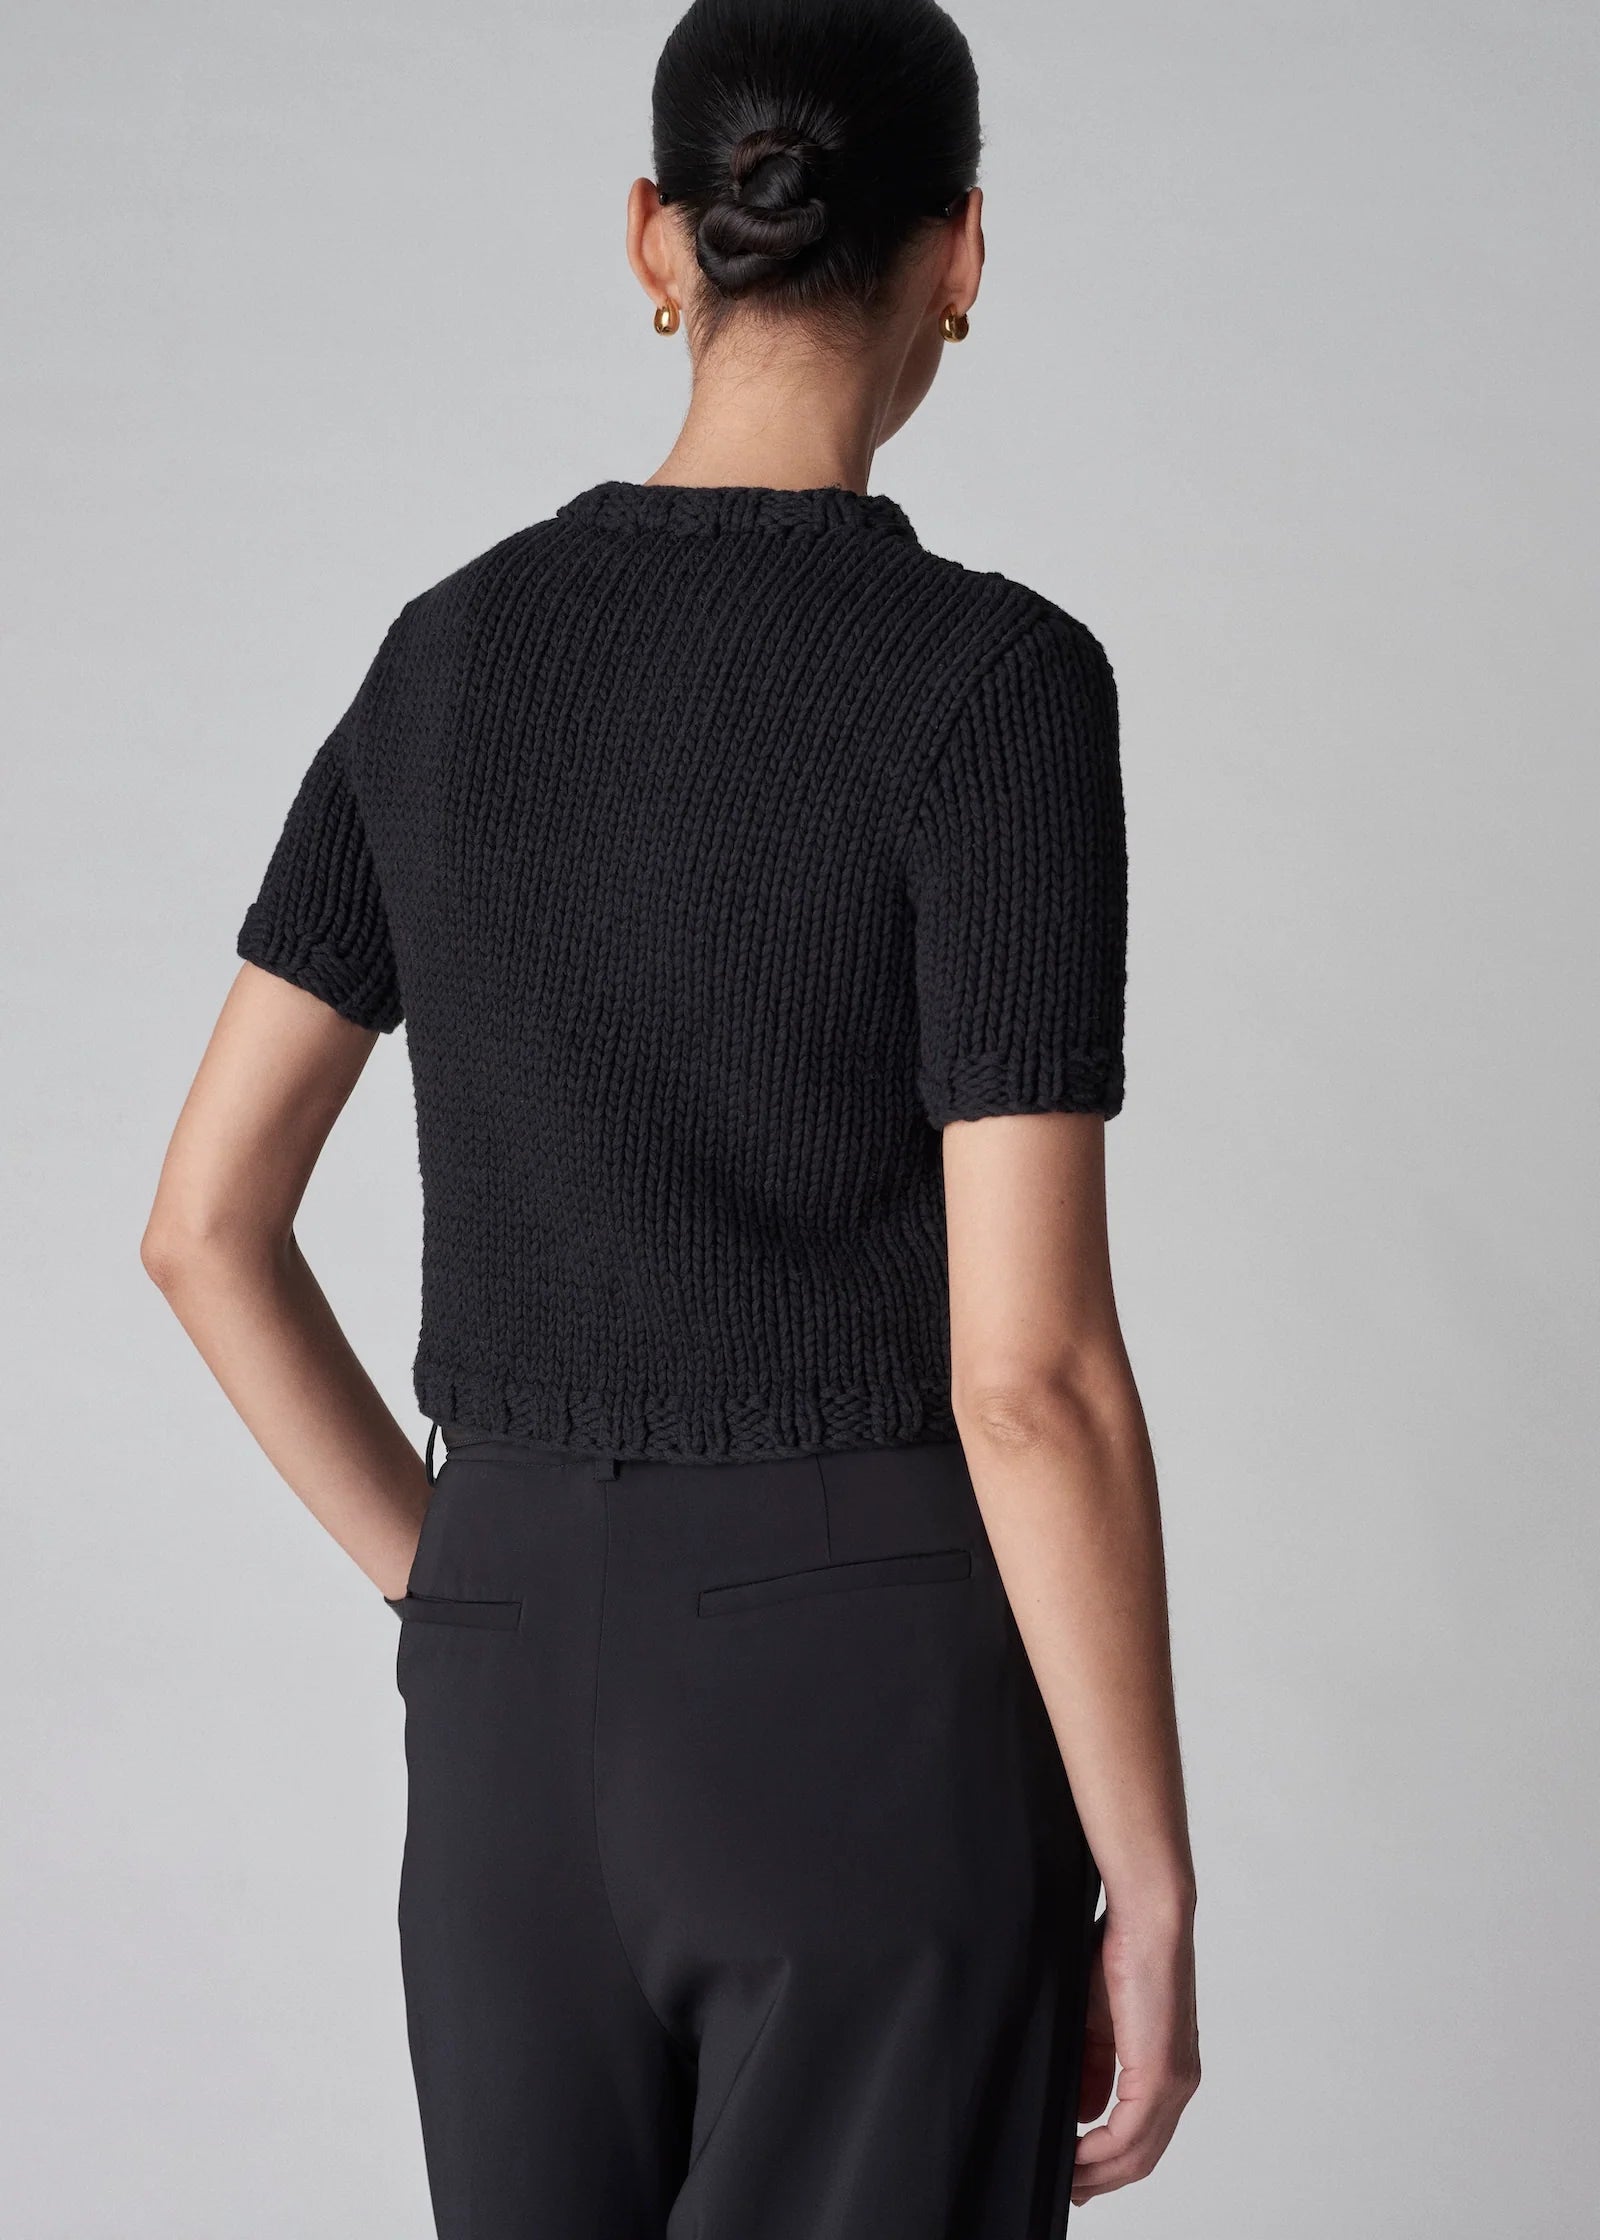 Fitted Sweater in Cotton Knit Black